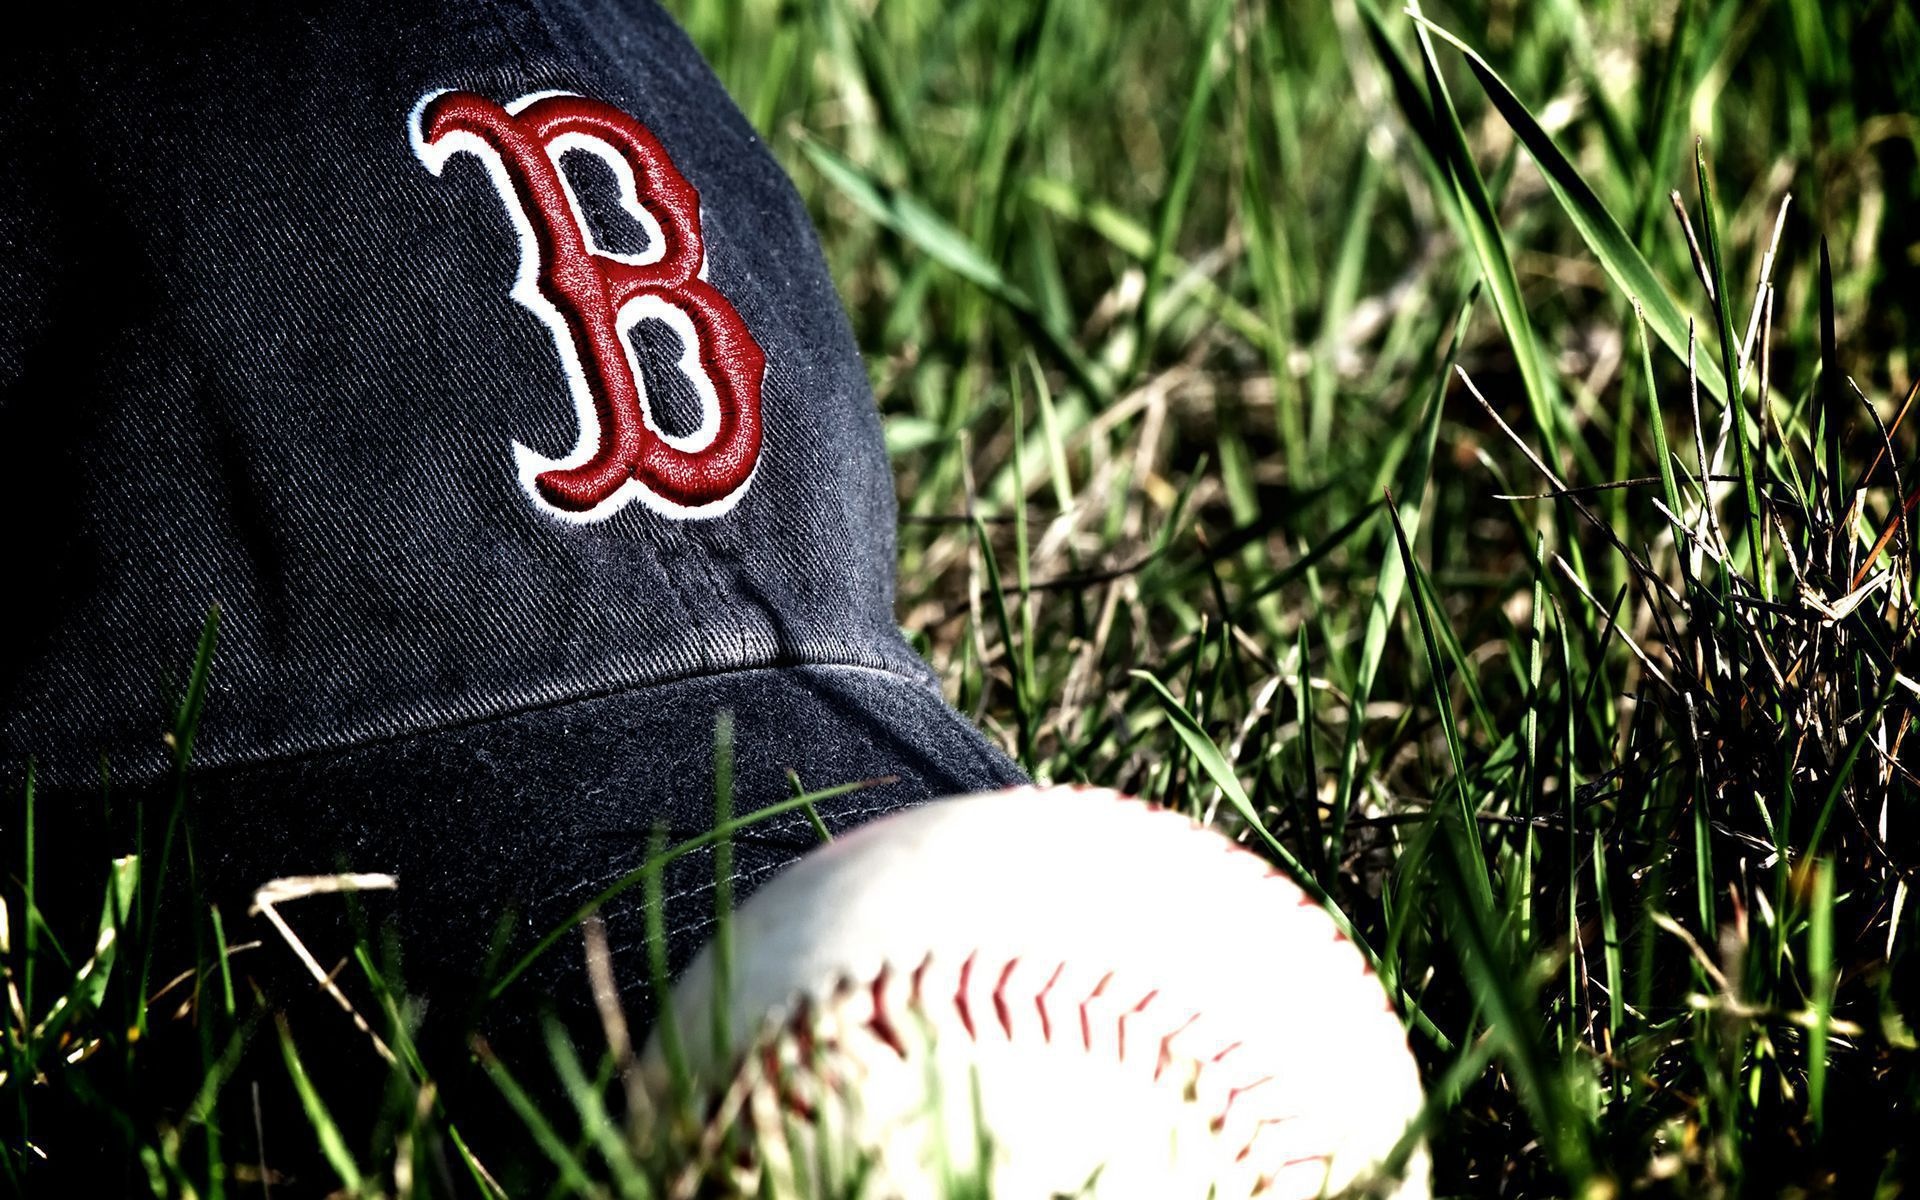 Boston Red Sox: One of four teams taking part in the first FTX MLB Home Run Derby X. 1920x1200 HD Wallpaper.